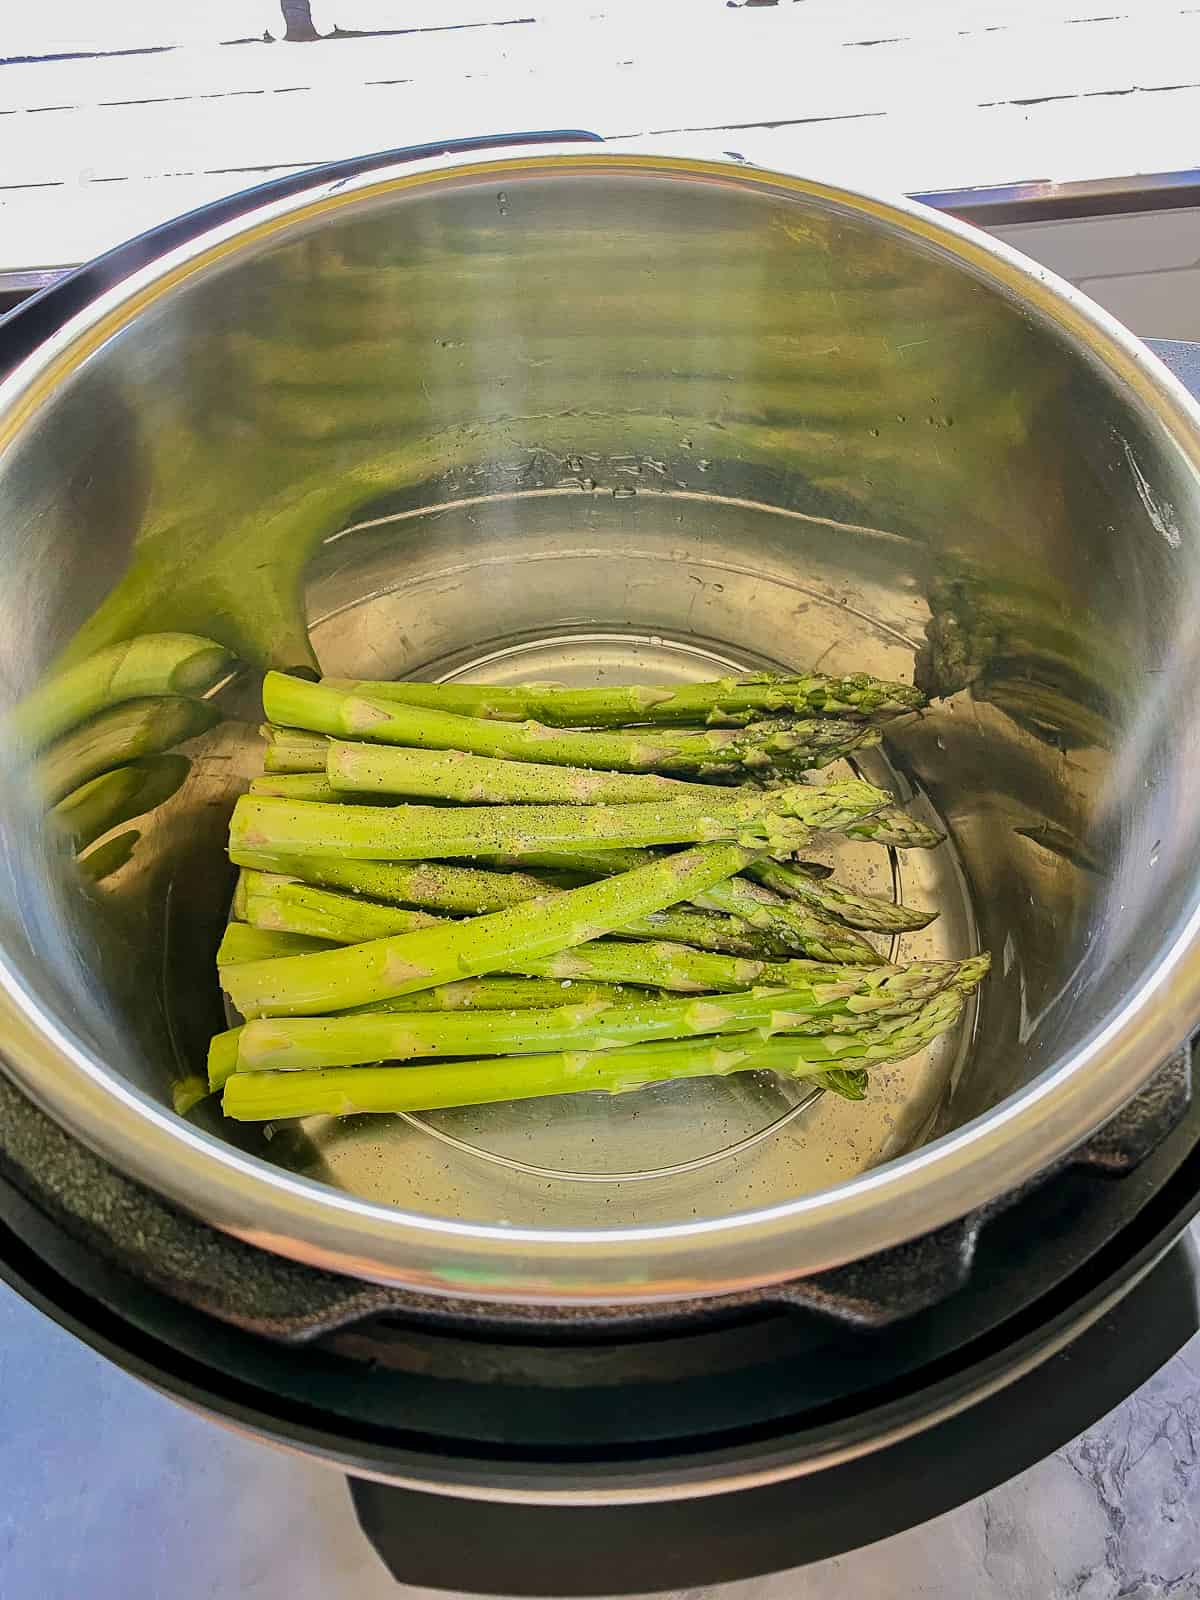 Asparagus resting in an Instant pot.